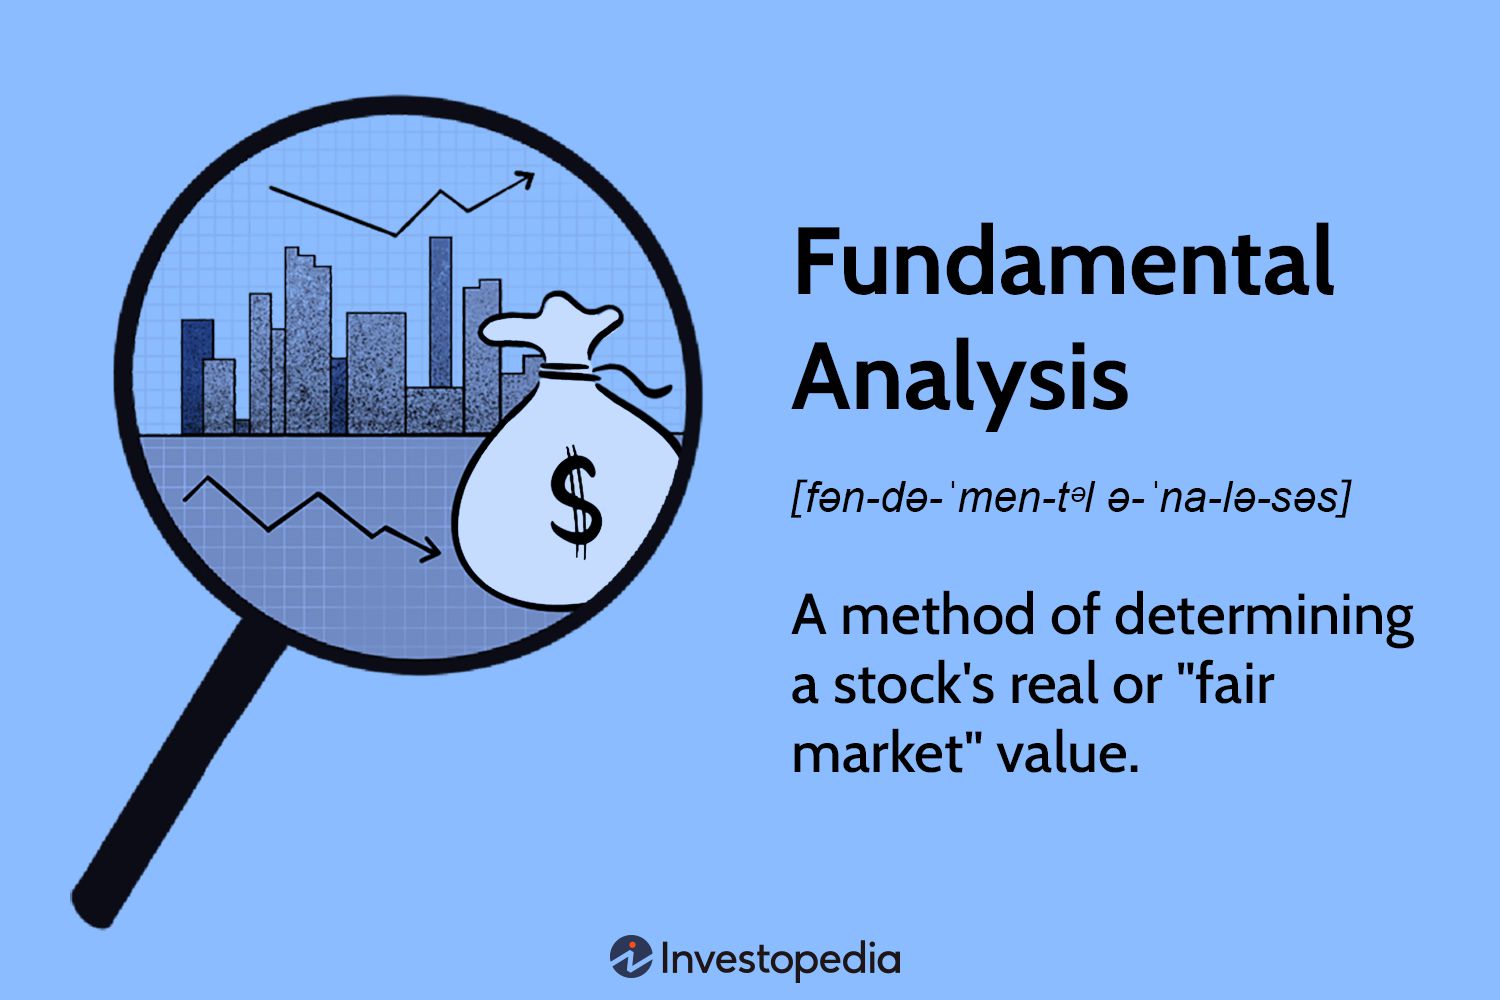 what is the purpose of fundamental analysis